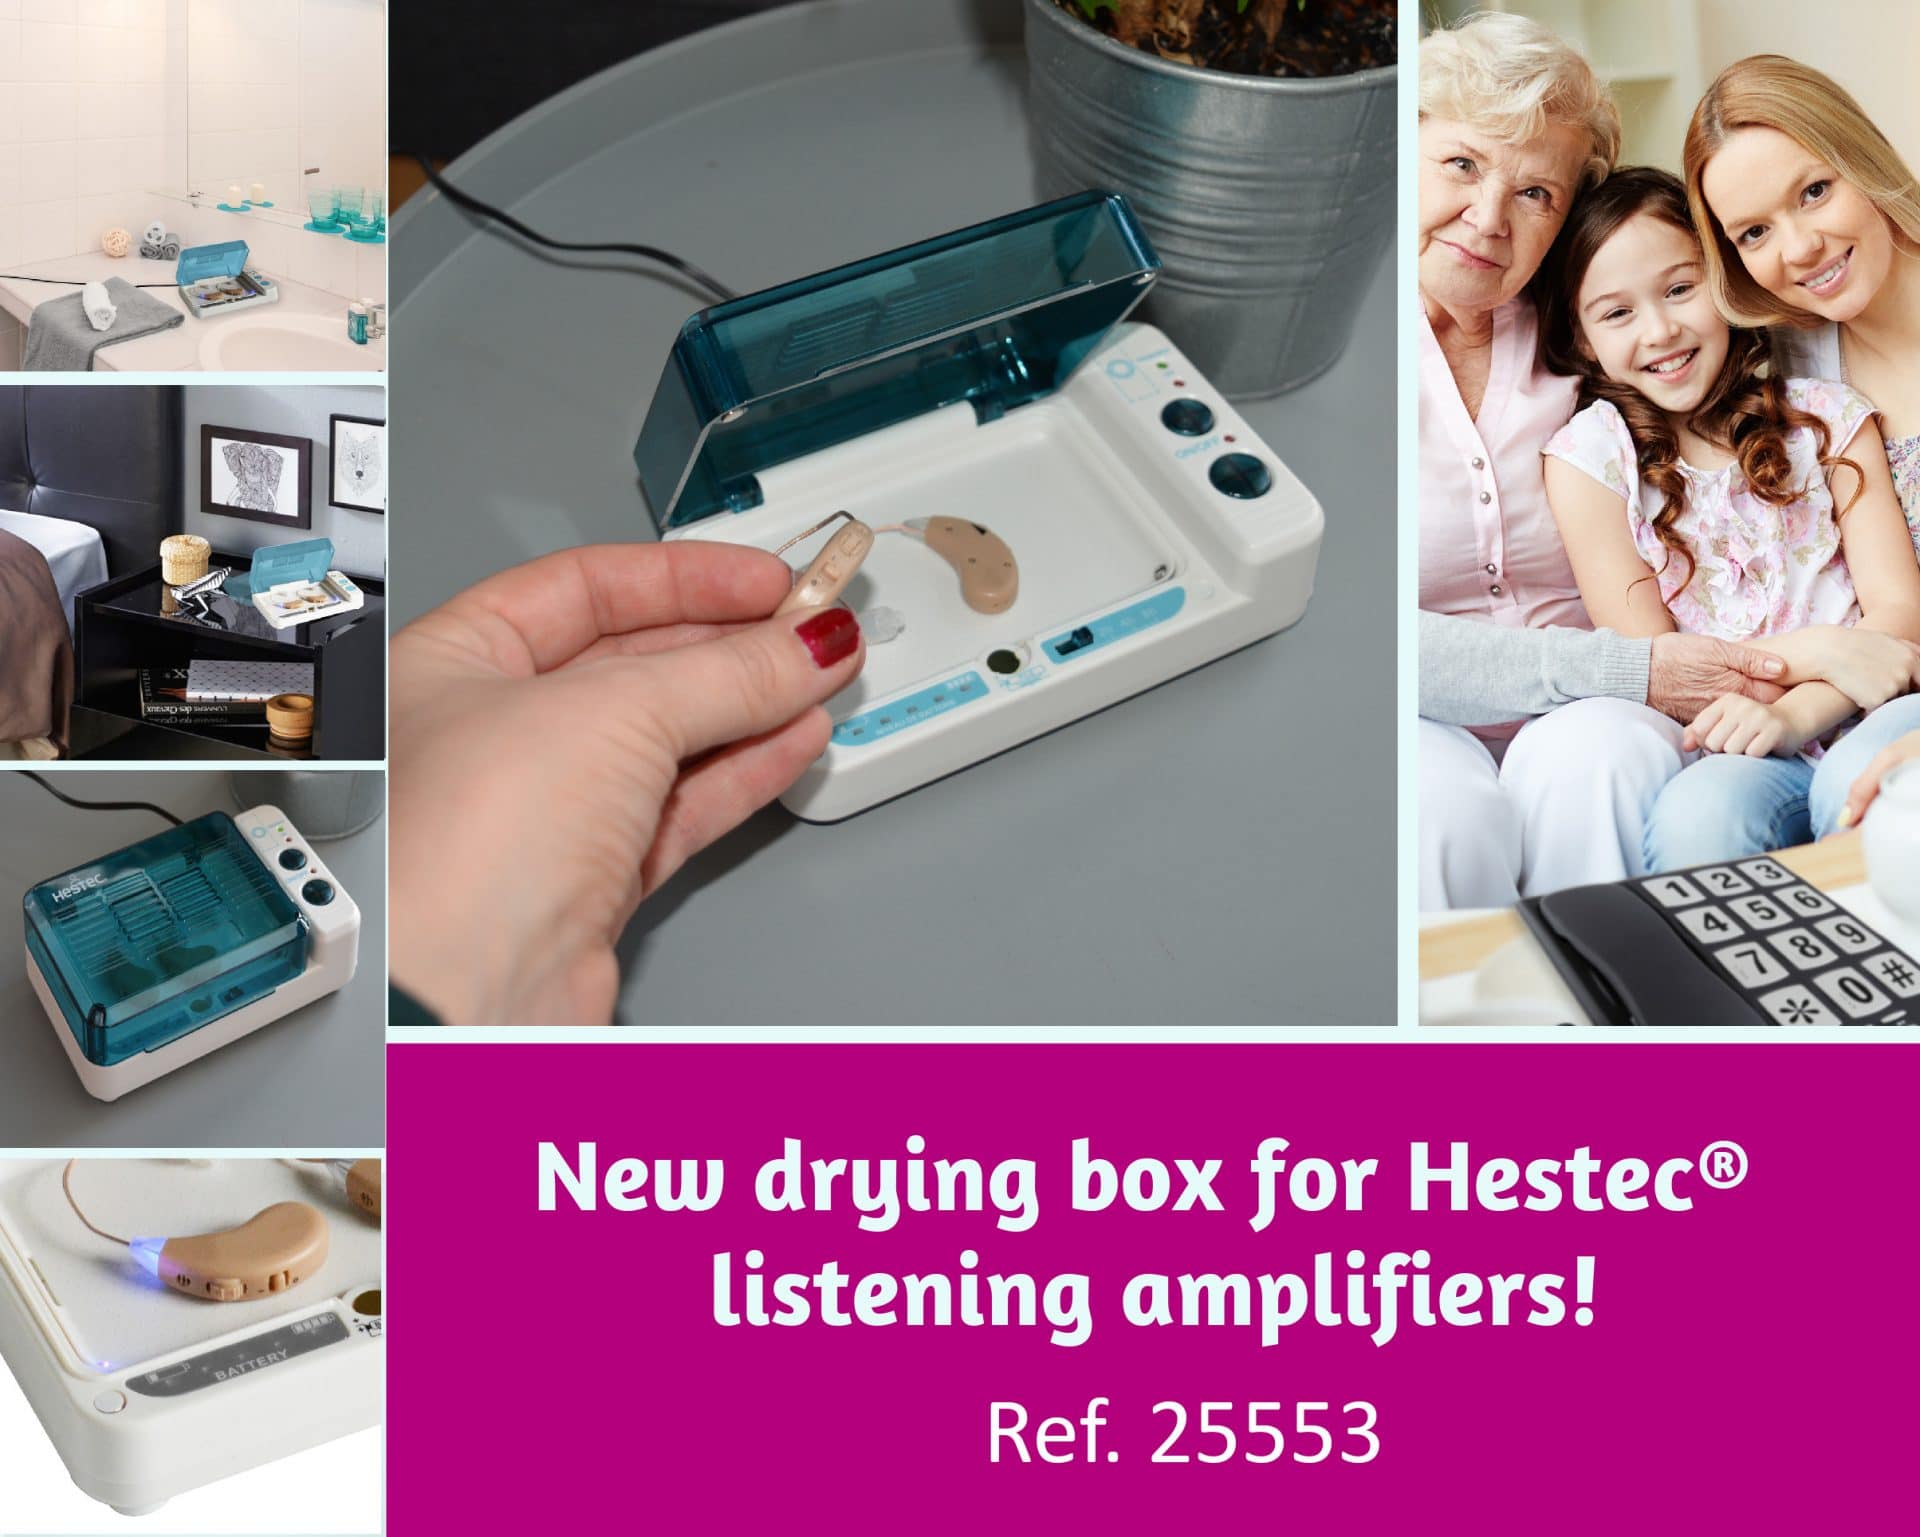 New drying box for Hestec® listening amplifiers!